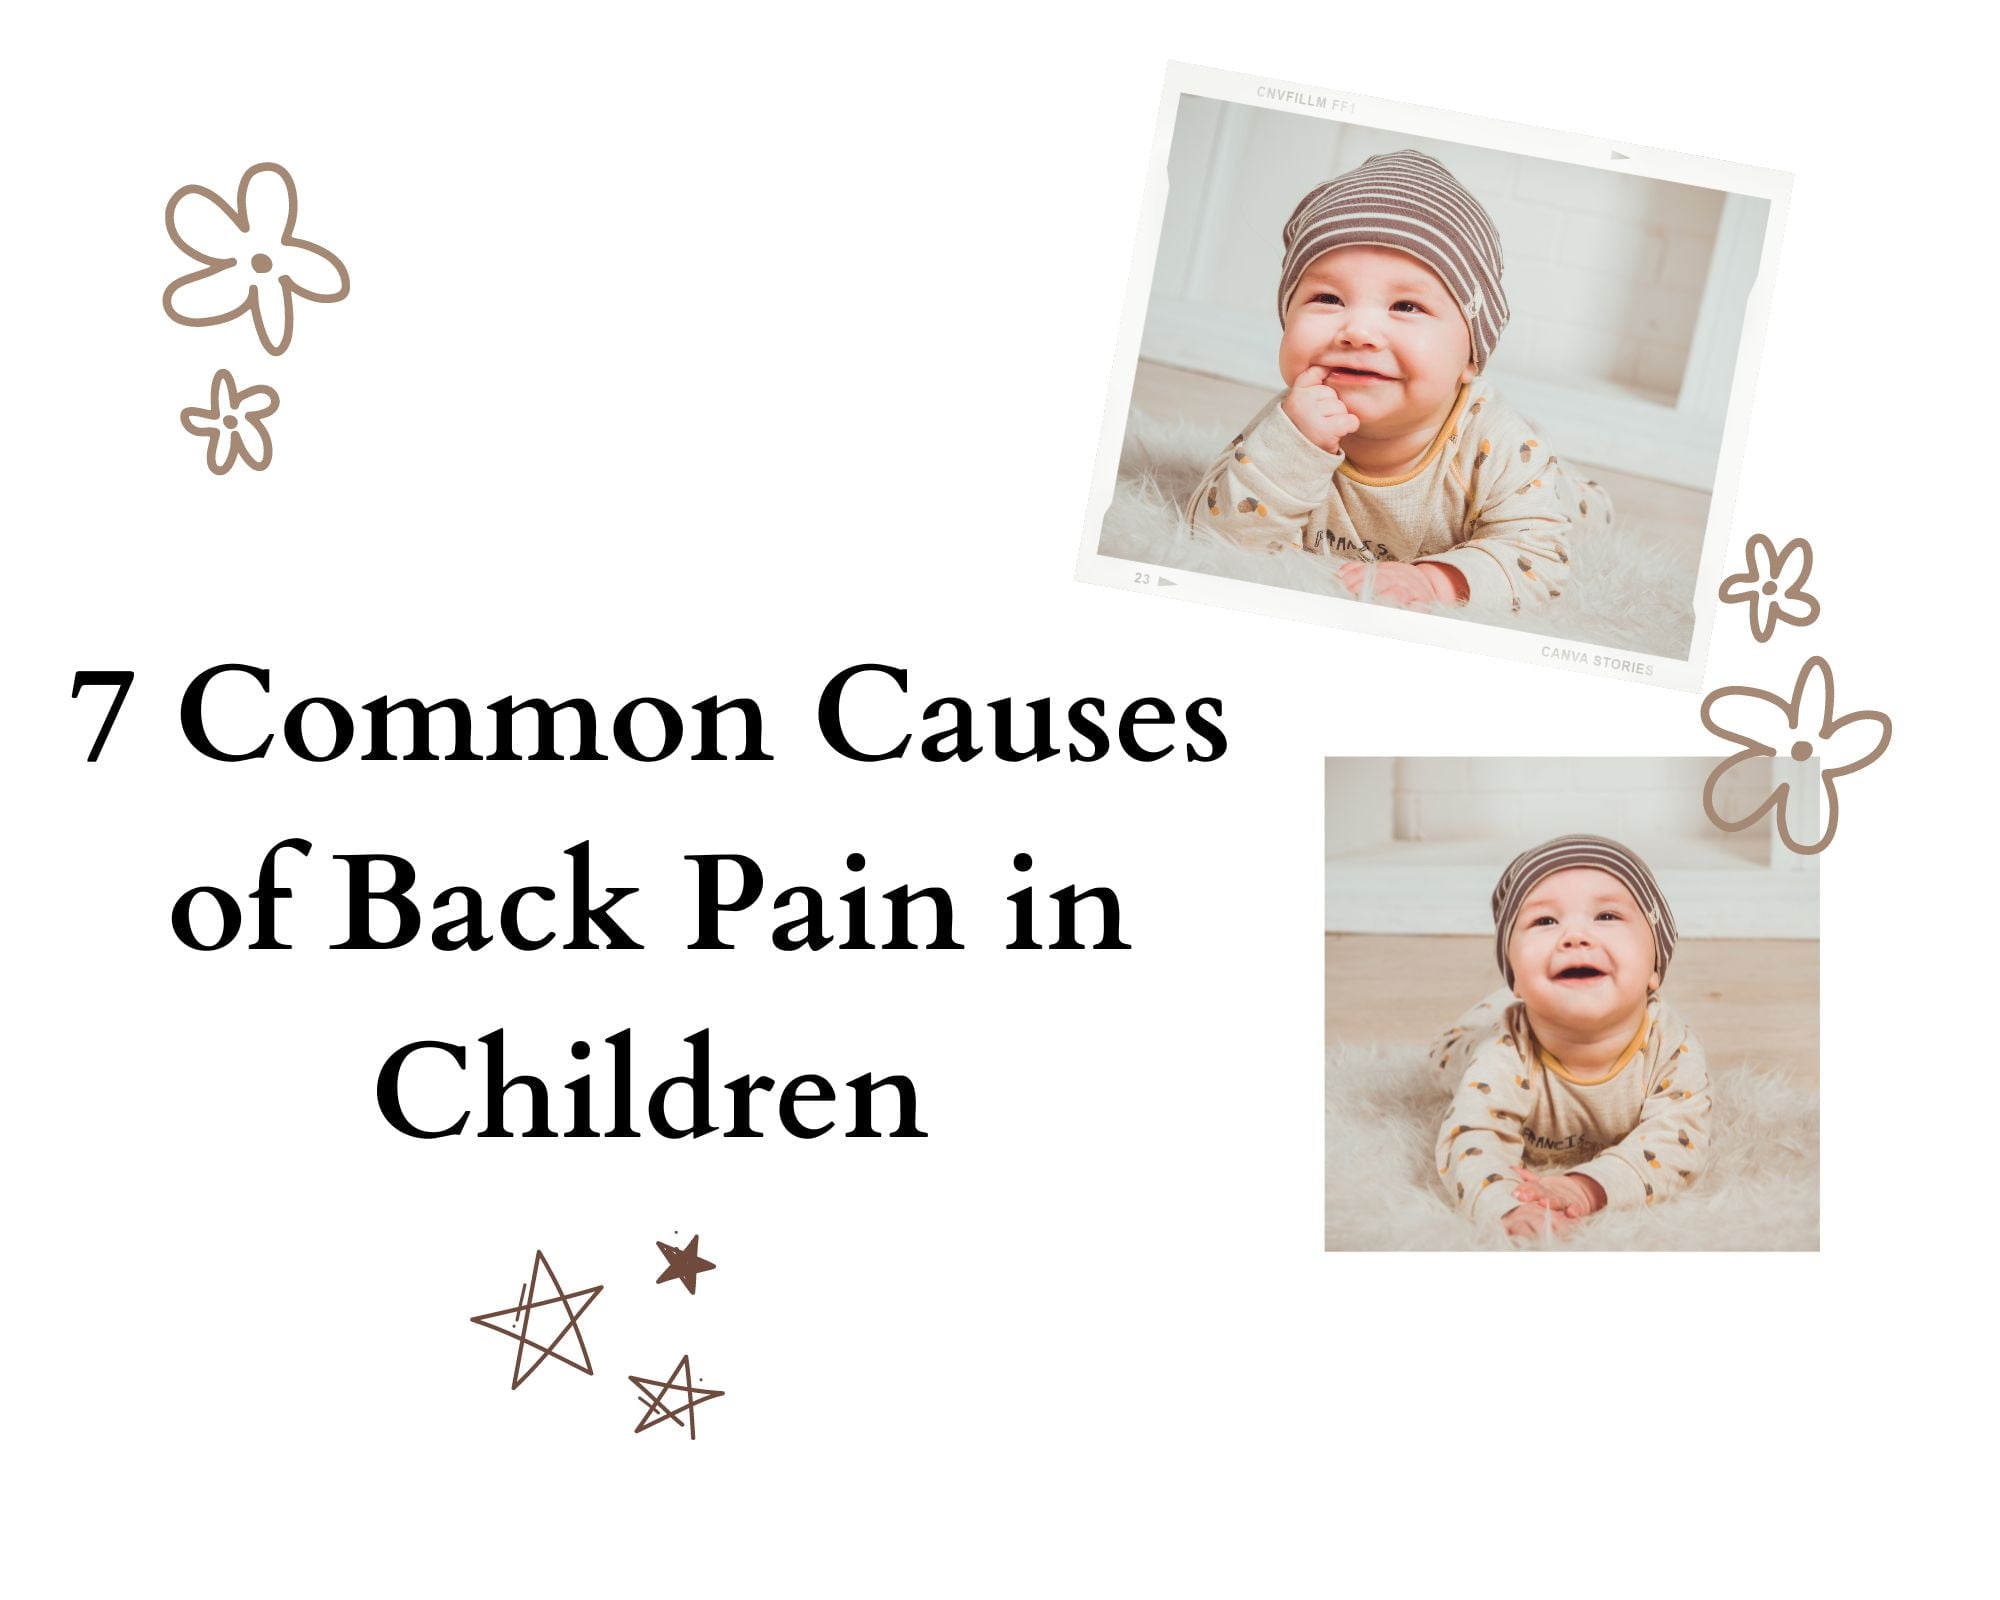 7 Common Causes of Back Pain in Children